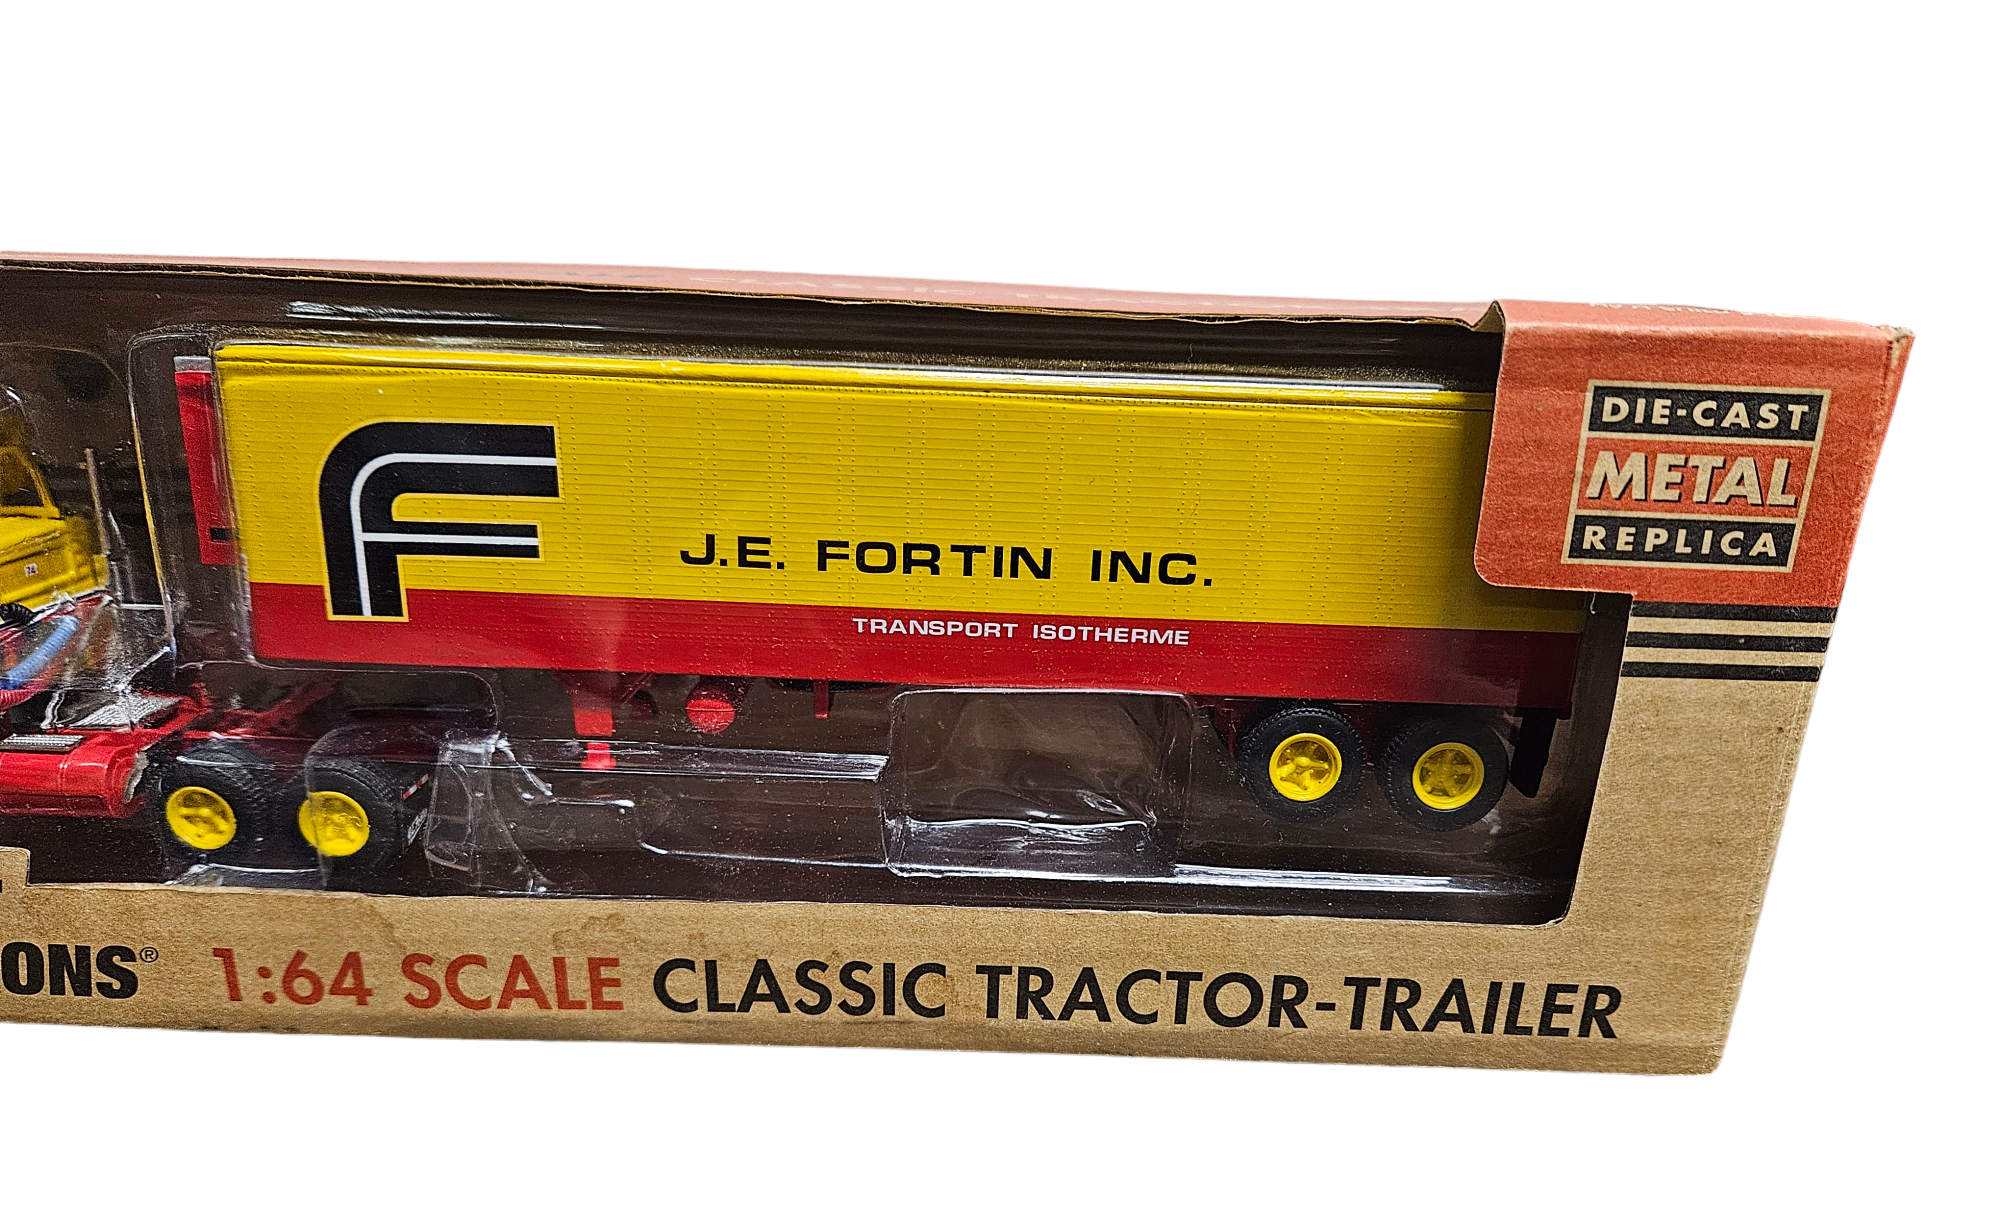 FREIGHTLINER  J.E. Fortin INC. Classic Tractor Trailer in 1/64